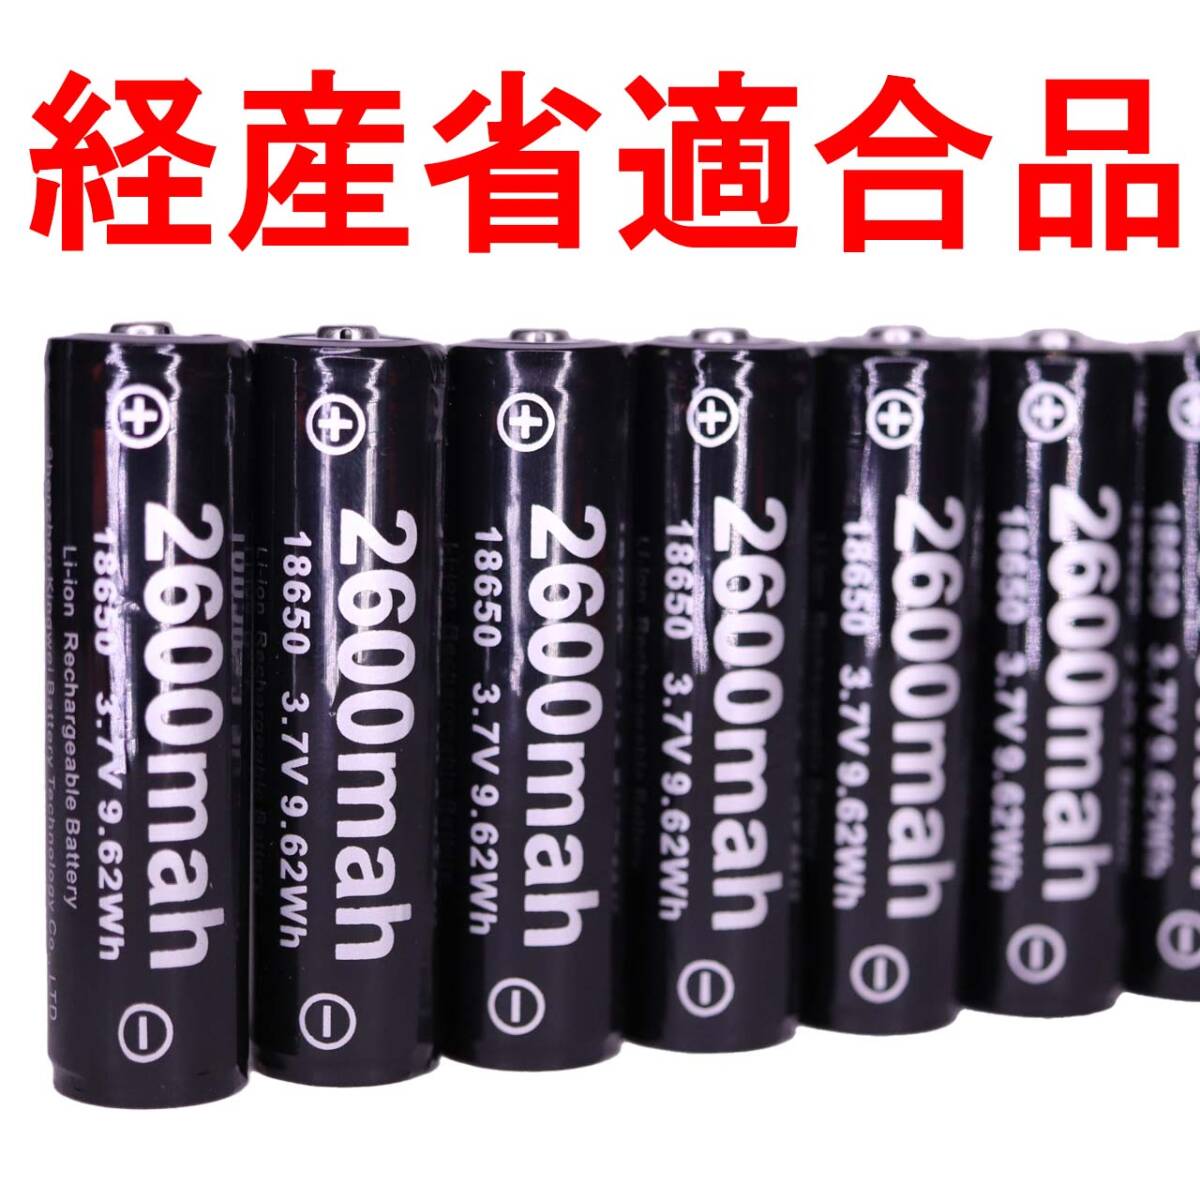 18650 lithium ion rechargeable battery battery PSE protection circuit flashlight head light handy light 2600mah 06